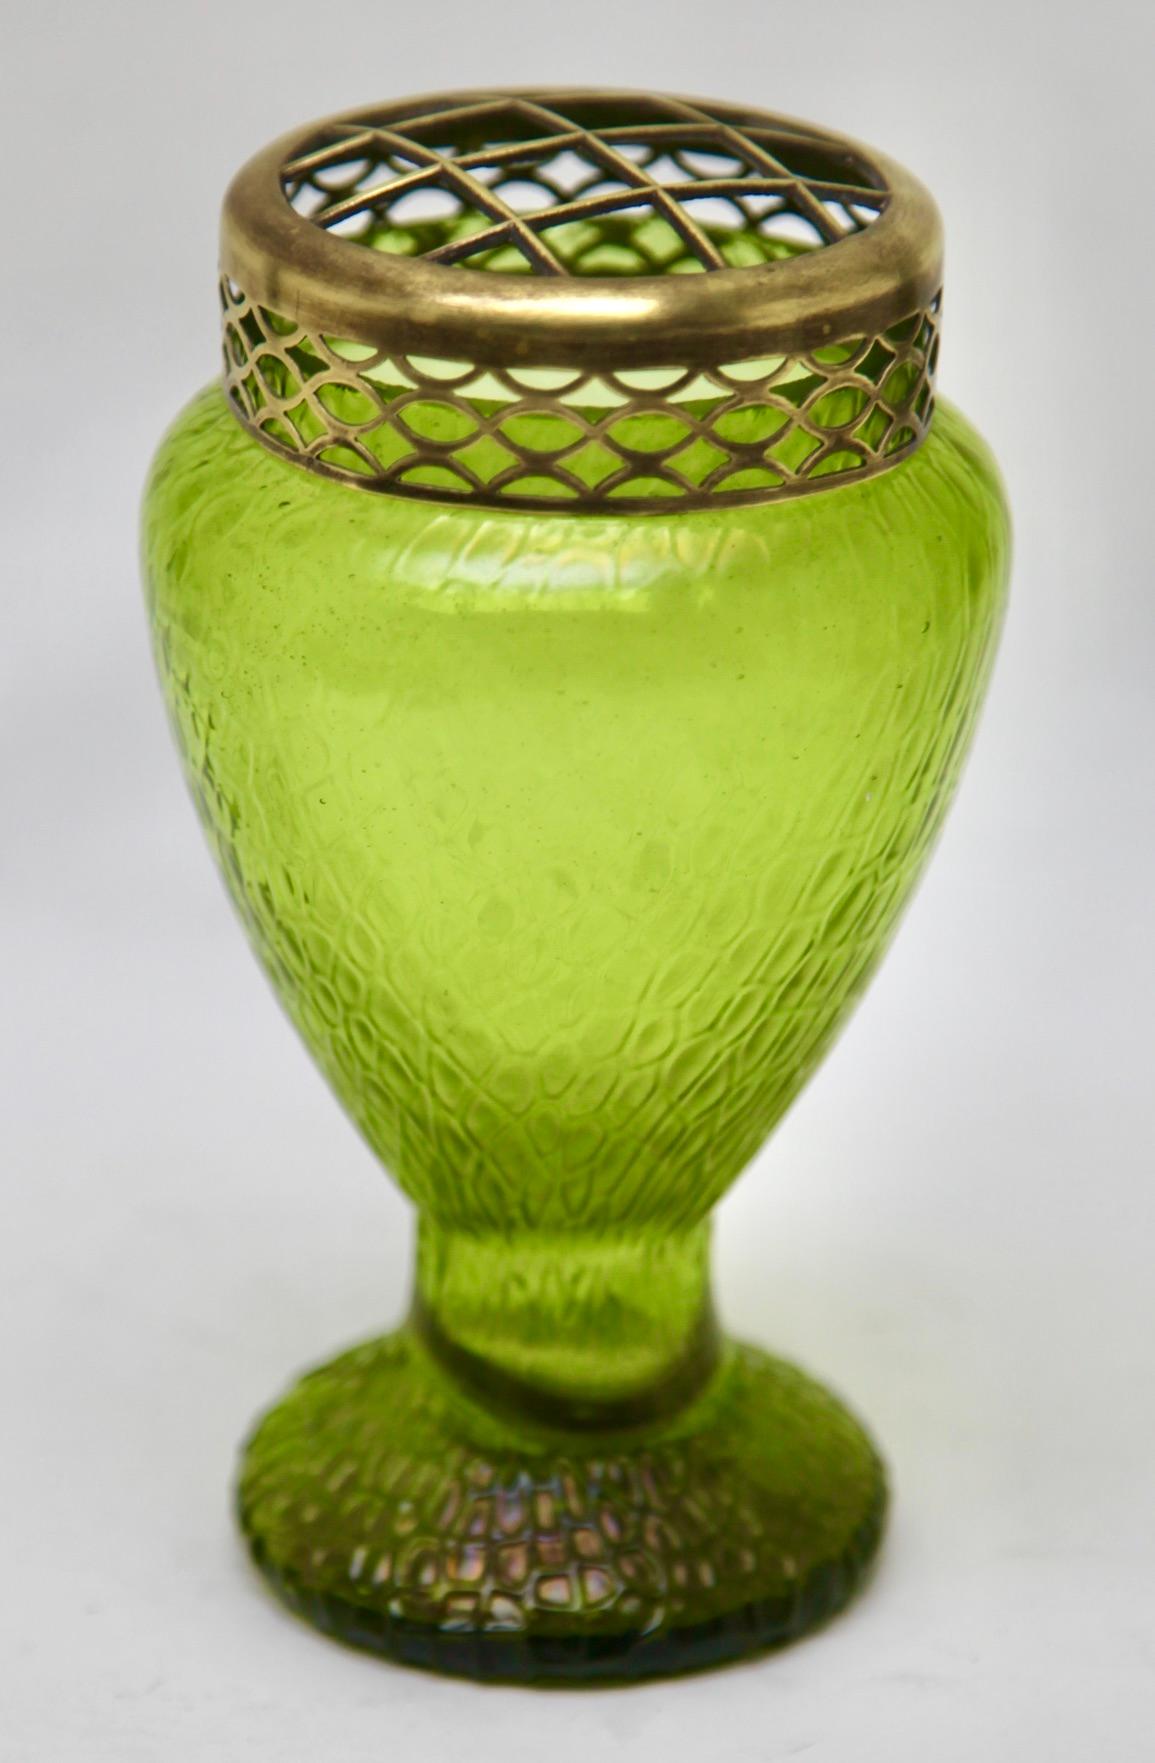 Art Nouveau Green iridescent glass Pique Fleurs' vase by Loetz' with Grille

Subtle, hand blown glass vase in the Art Deco style. This design for vases is often called 'Pique fleurs' or 'rose-bowl' and is supplied with a fitted metal grille to